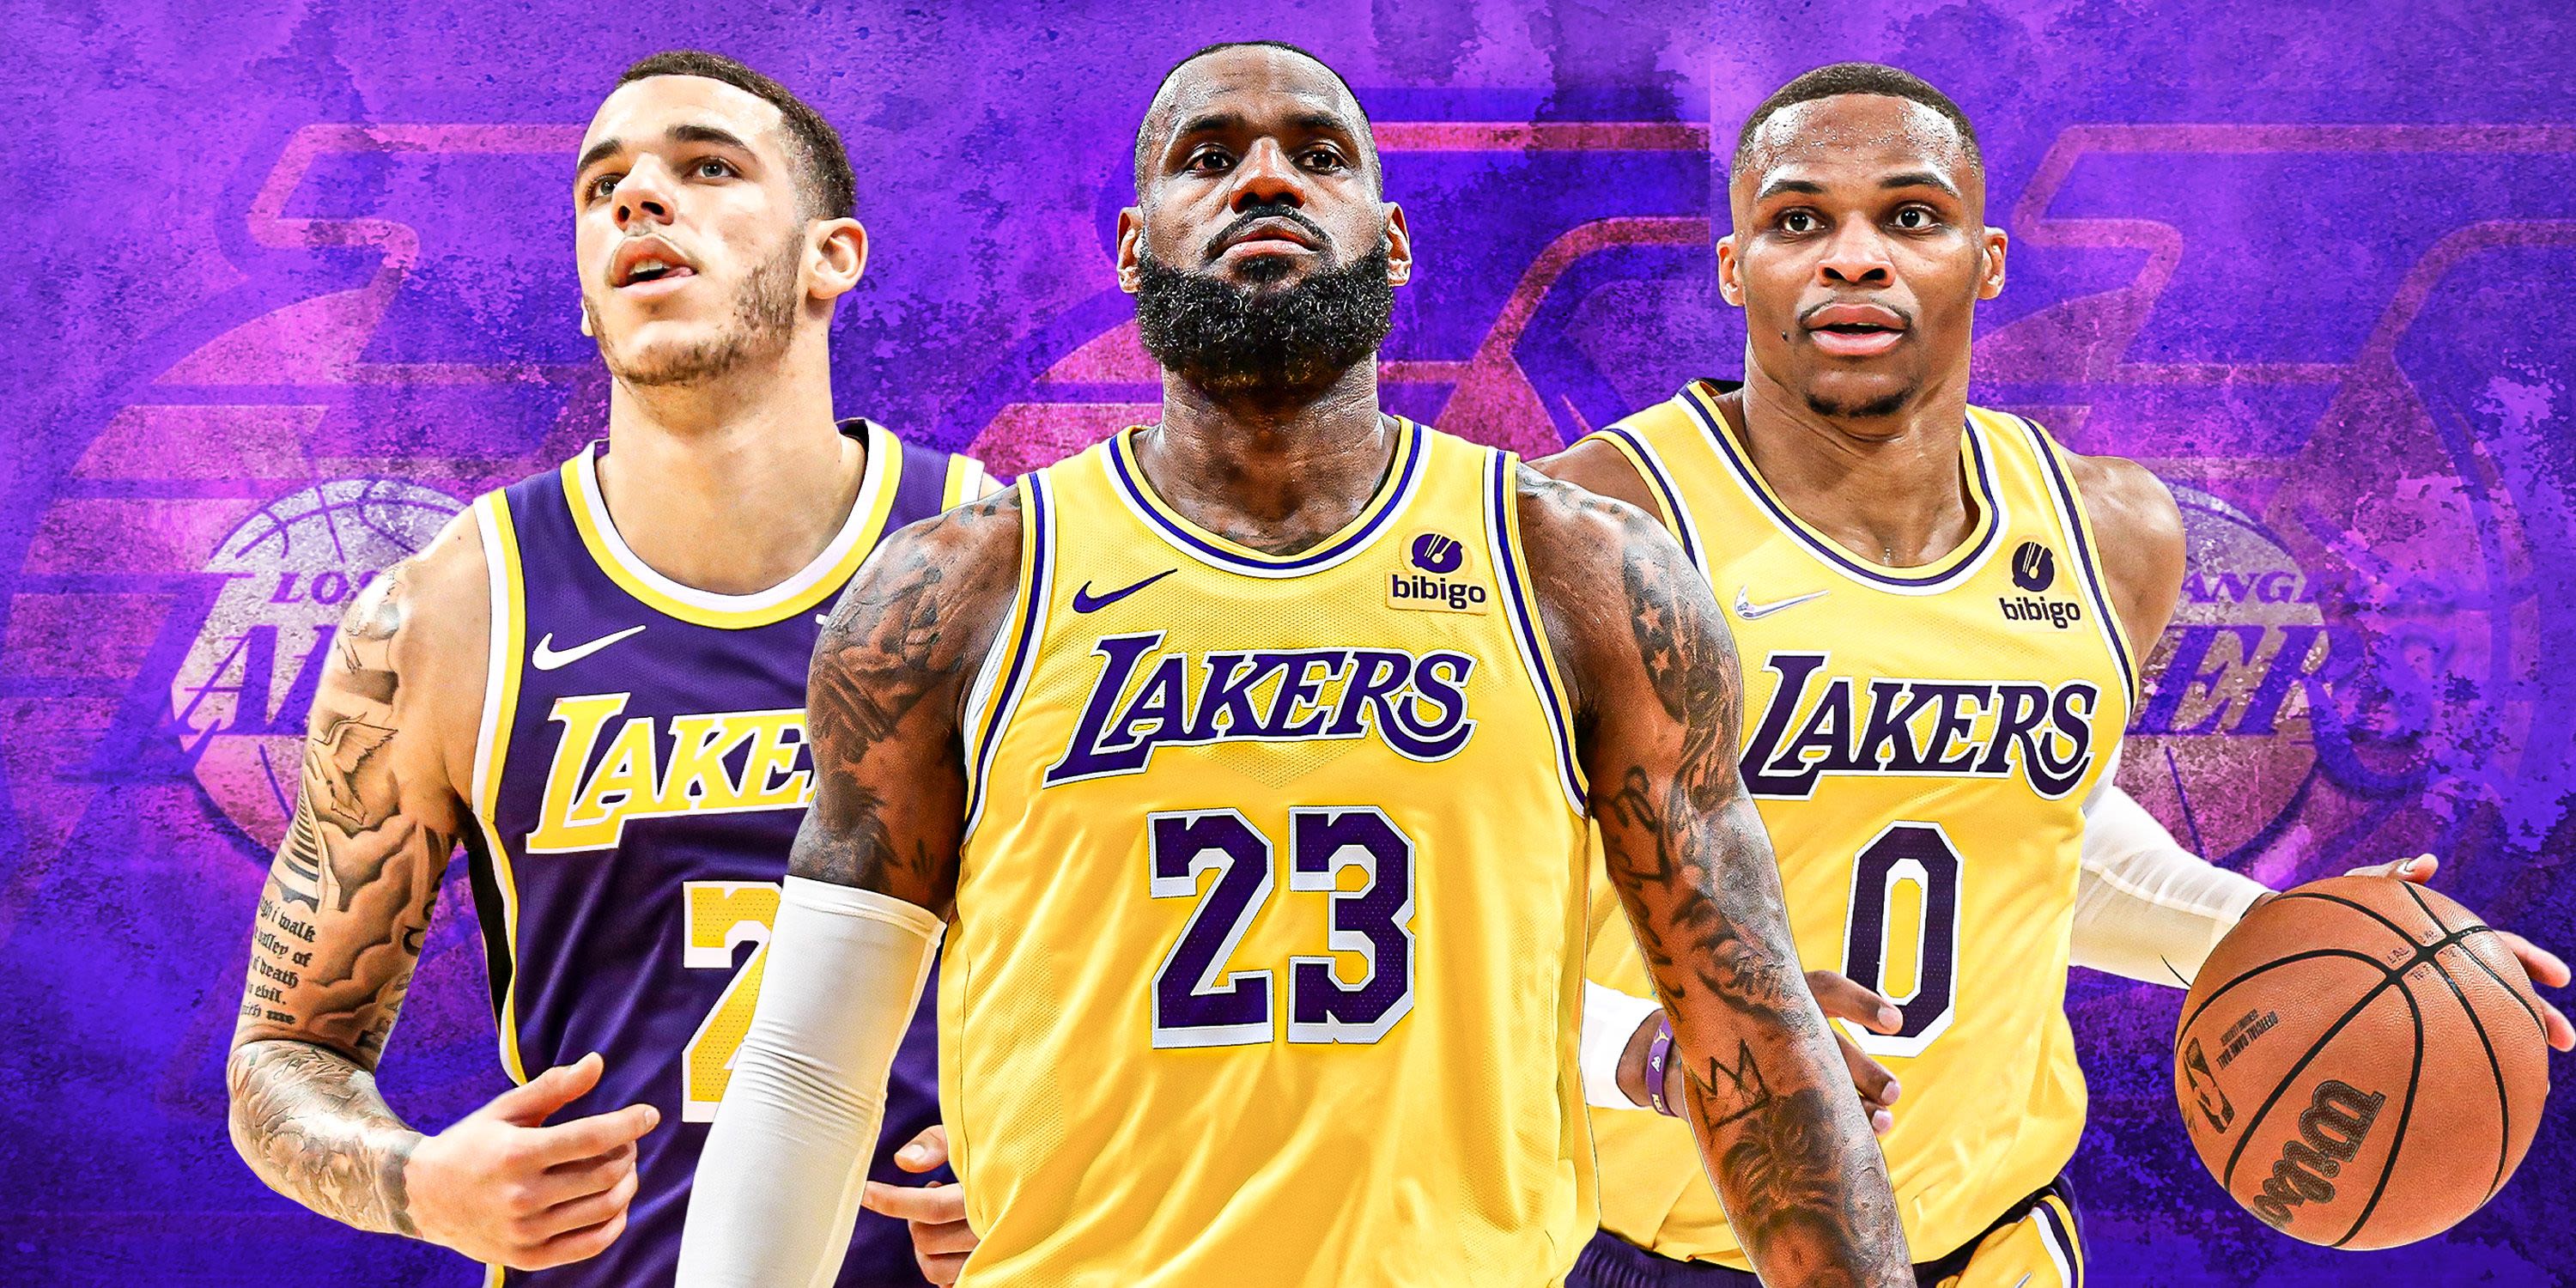 The Mistakes That Doomed The Lakers During LeBron's Tenure In LA